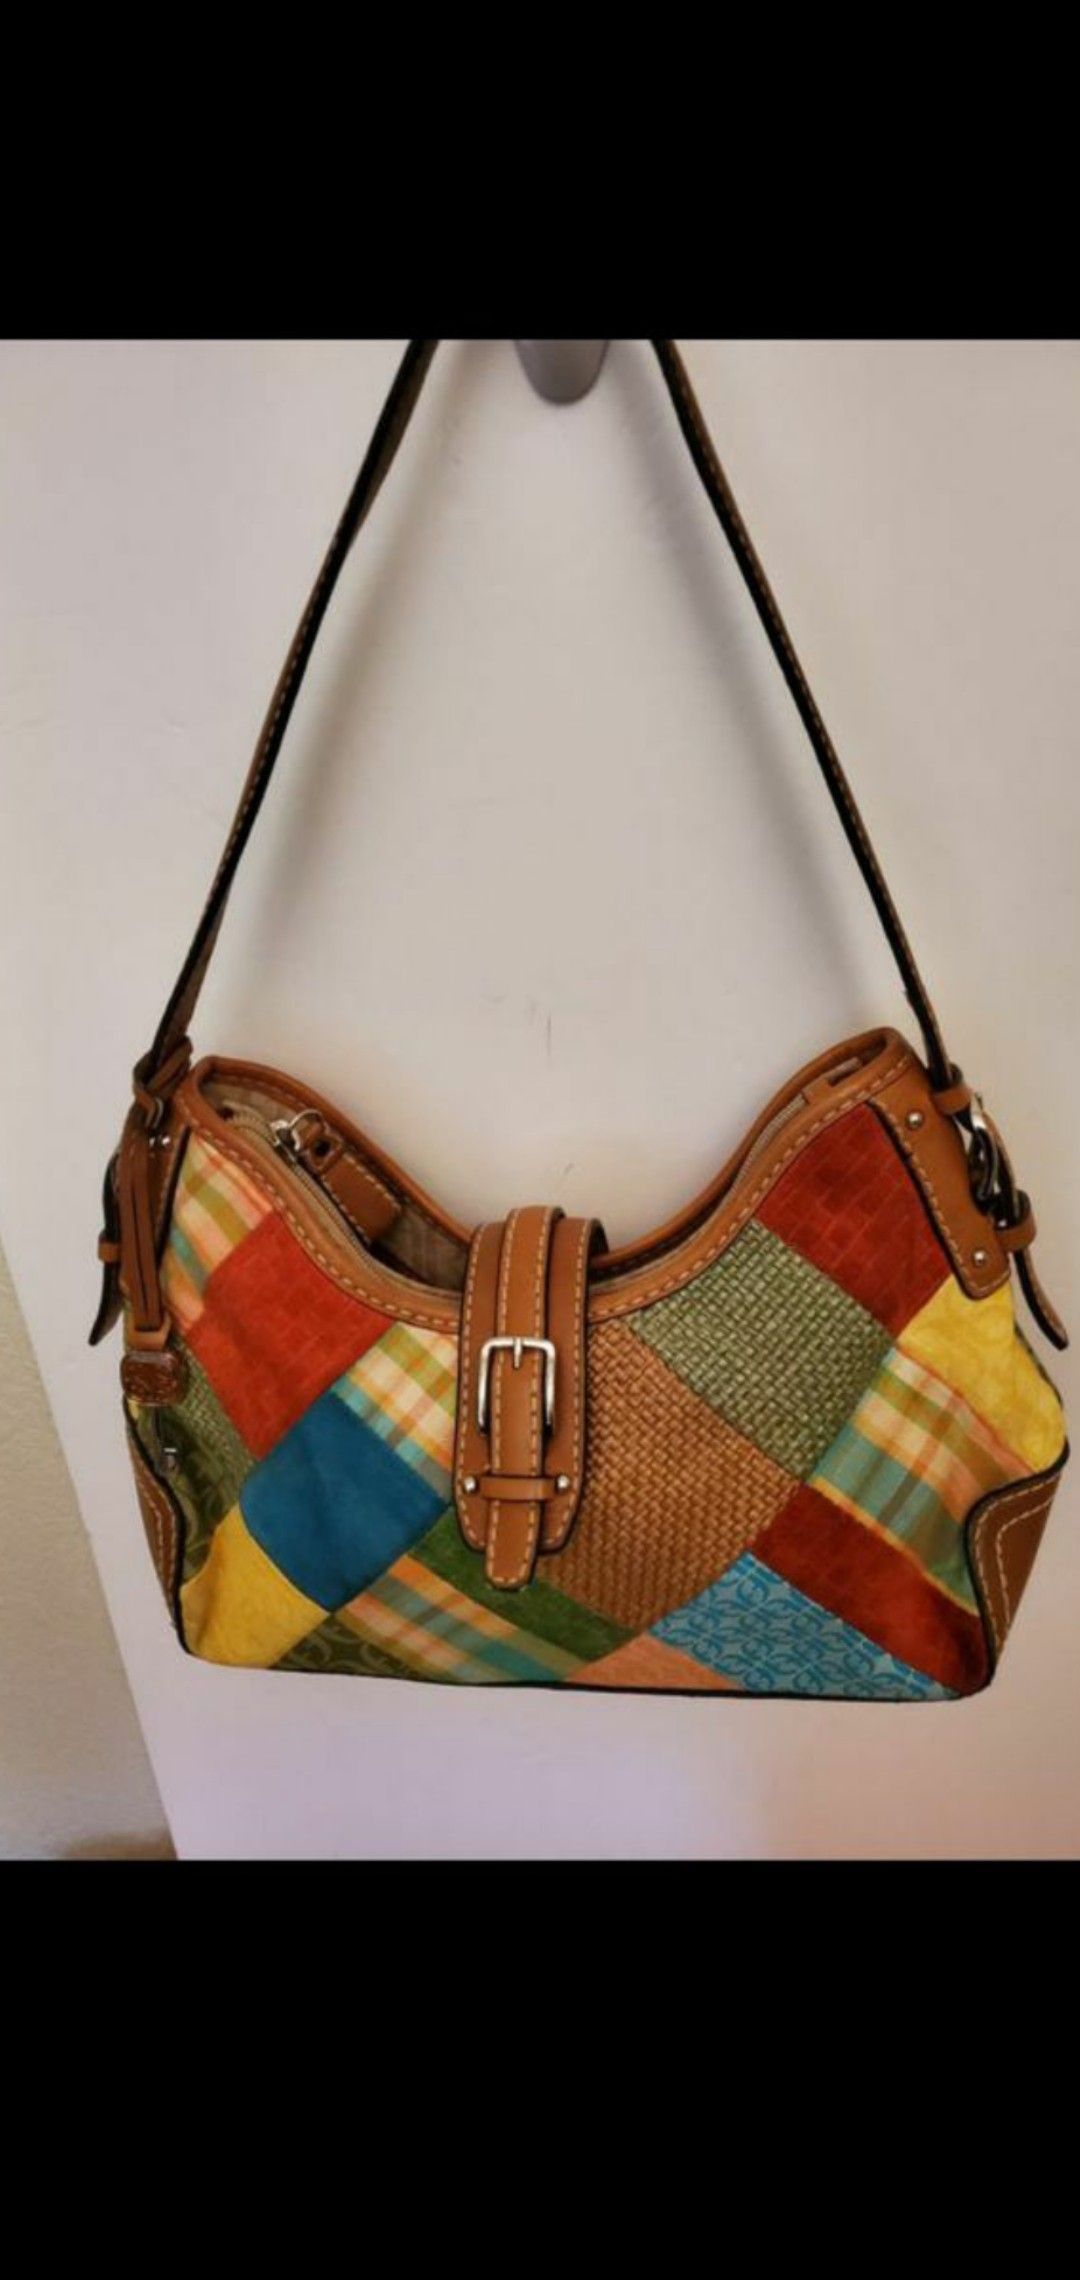 Fossil vintage patchwork hobo bag,very good condition